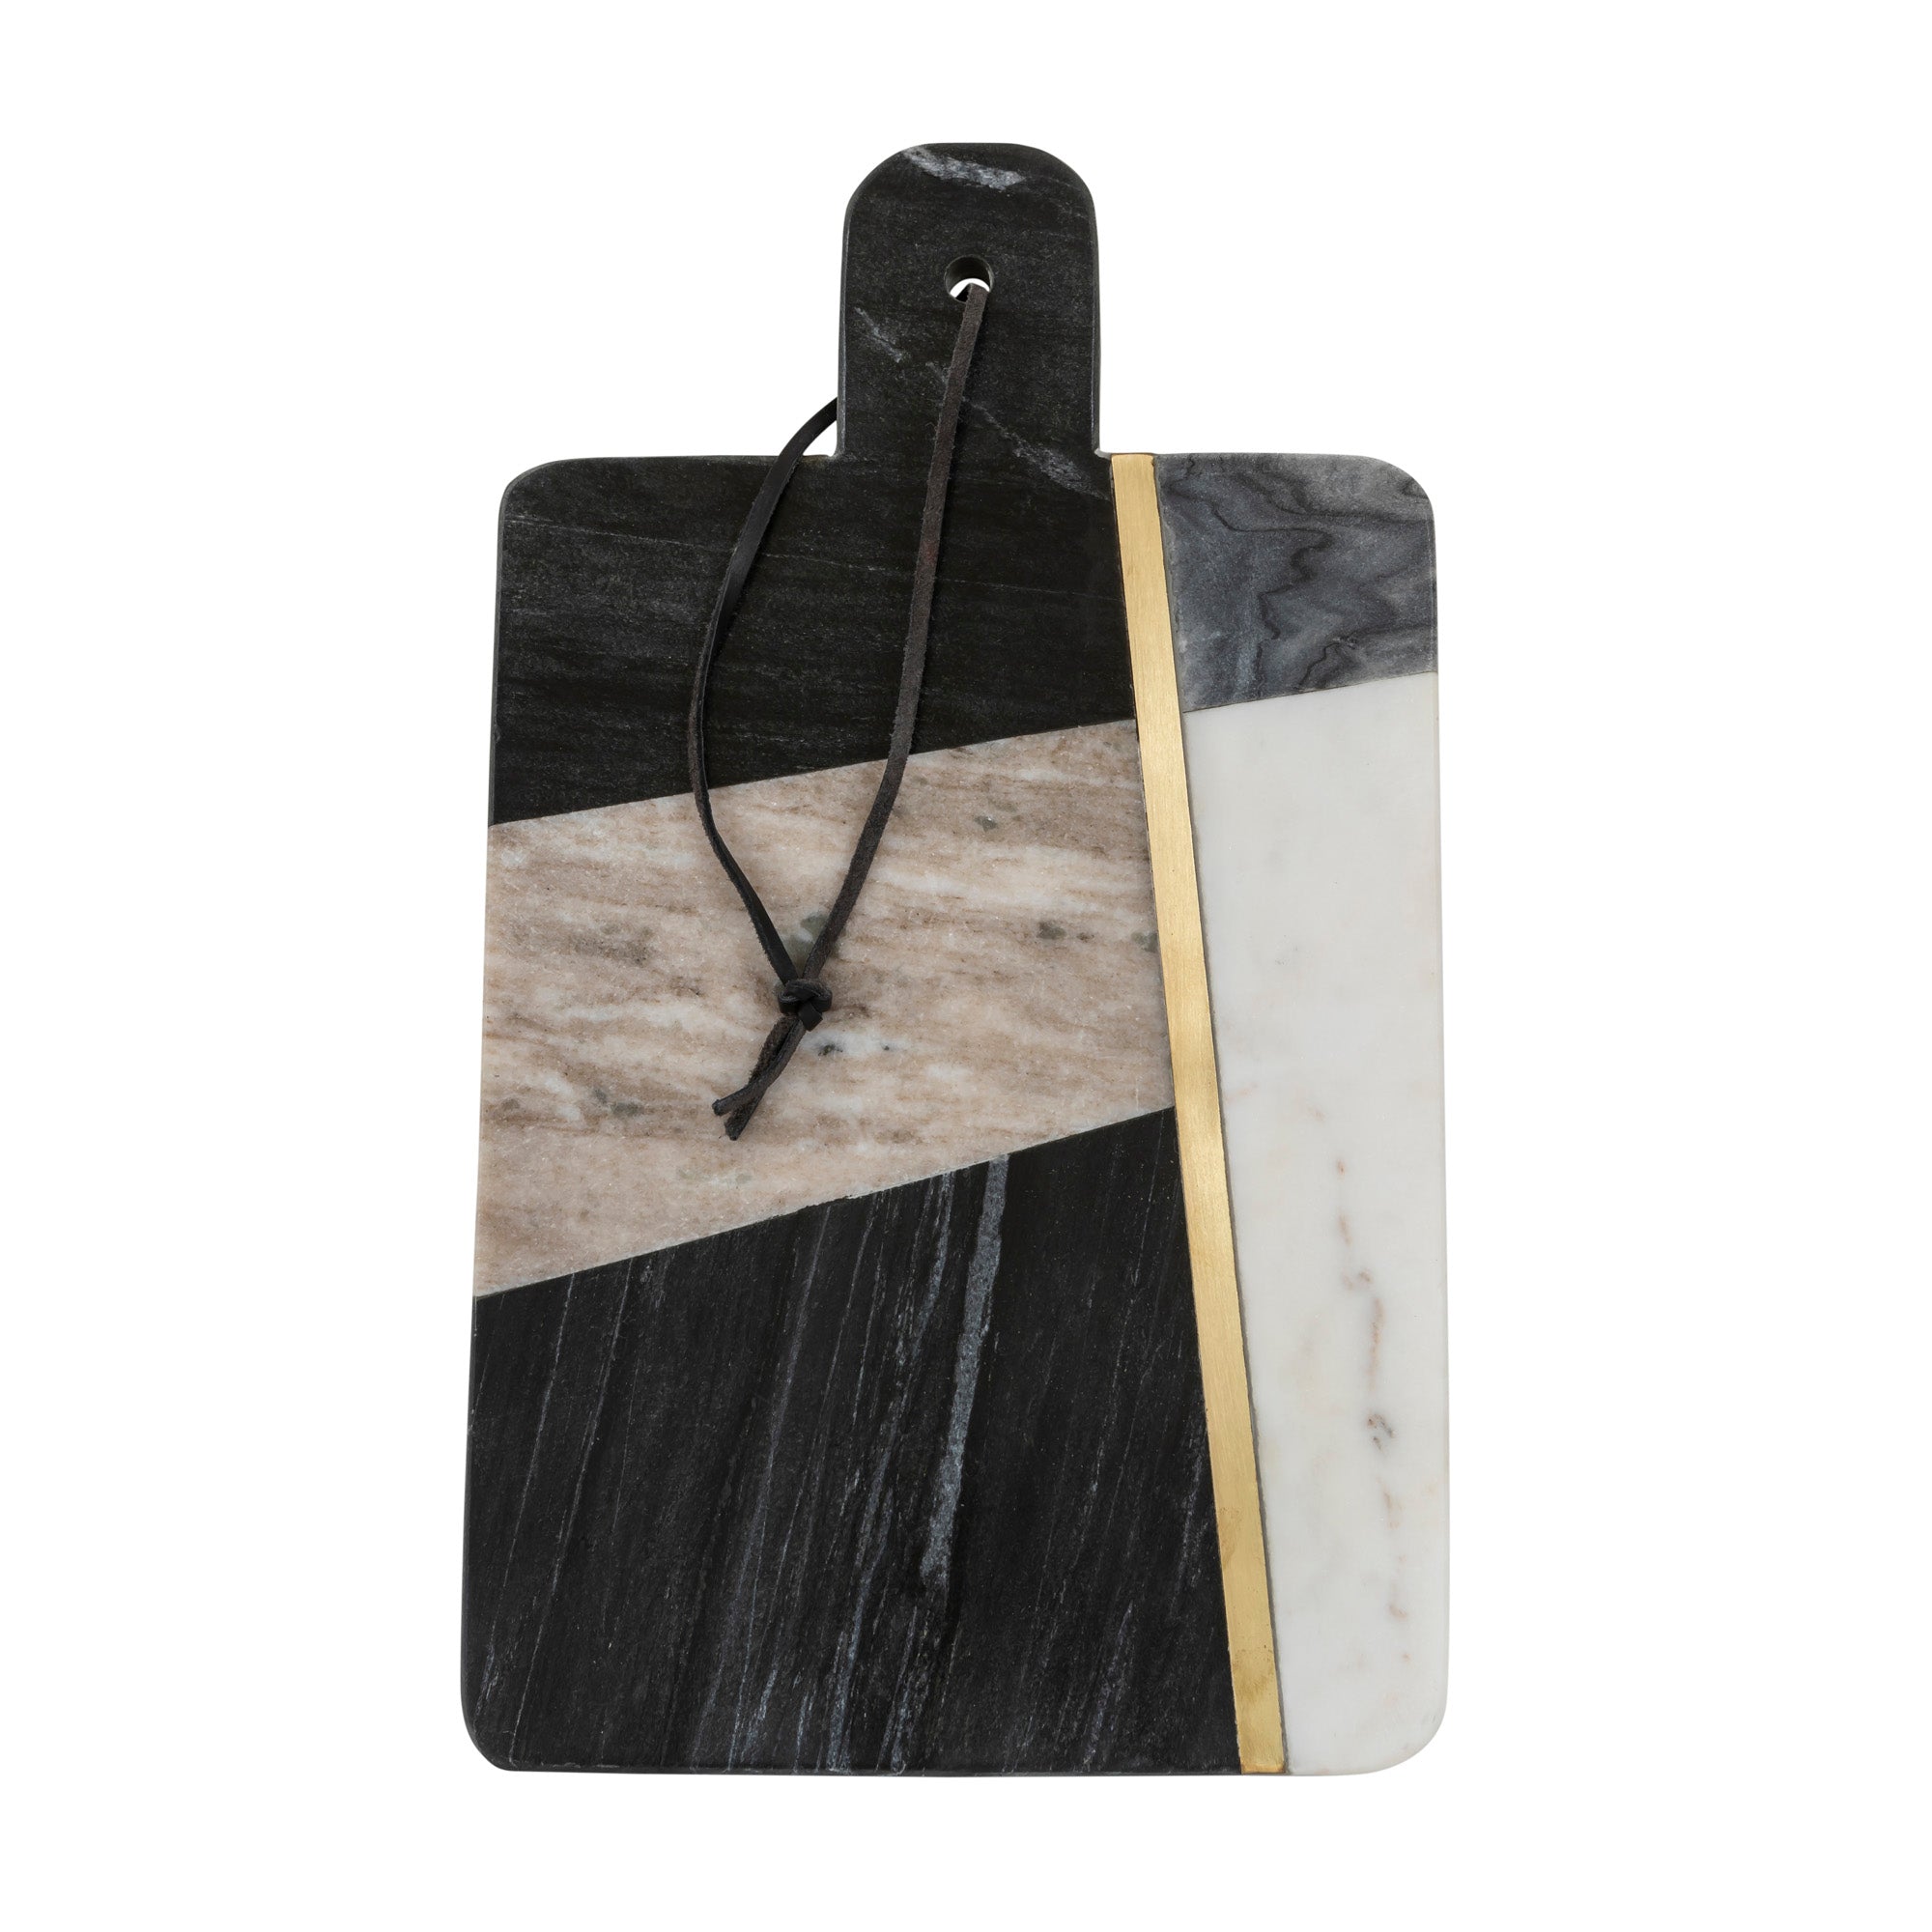 Marble cutting board or serving board in grey, black and gold